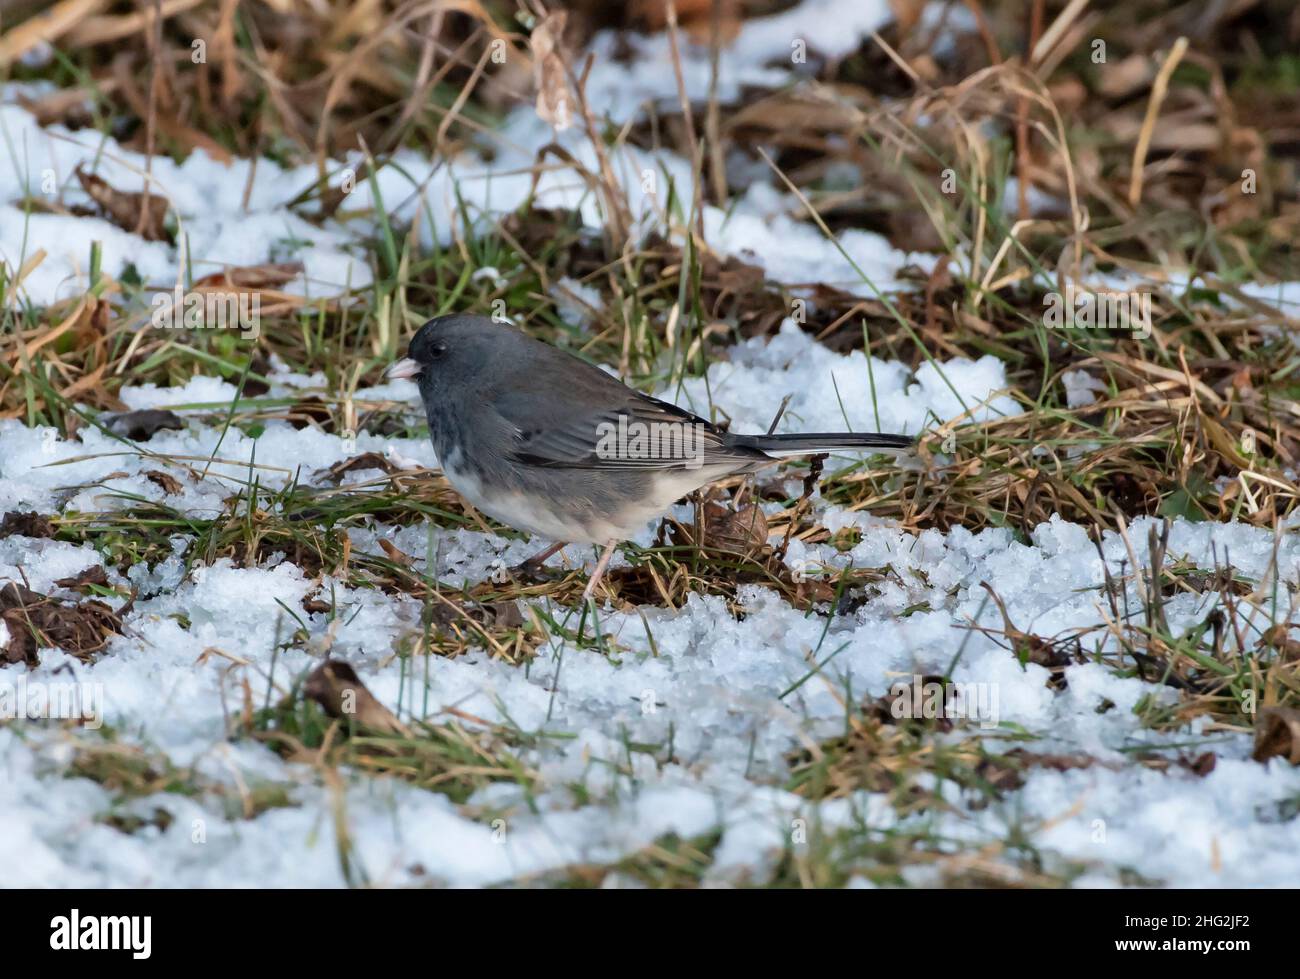 Slate Colored Junco, a common variation of the Dark Eyed Junco, Junco hyemalis searching for seeds among the grass and snow. Stock Photo